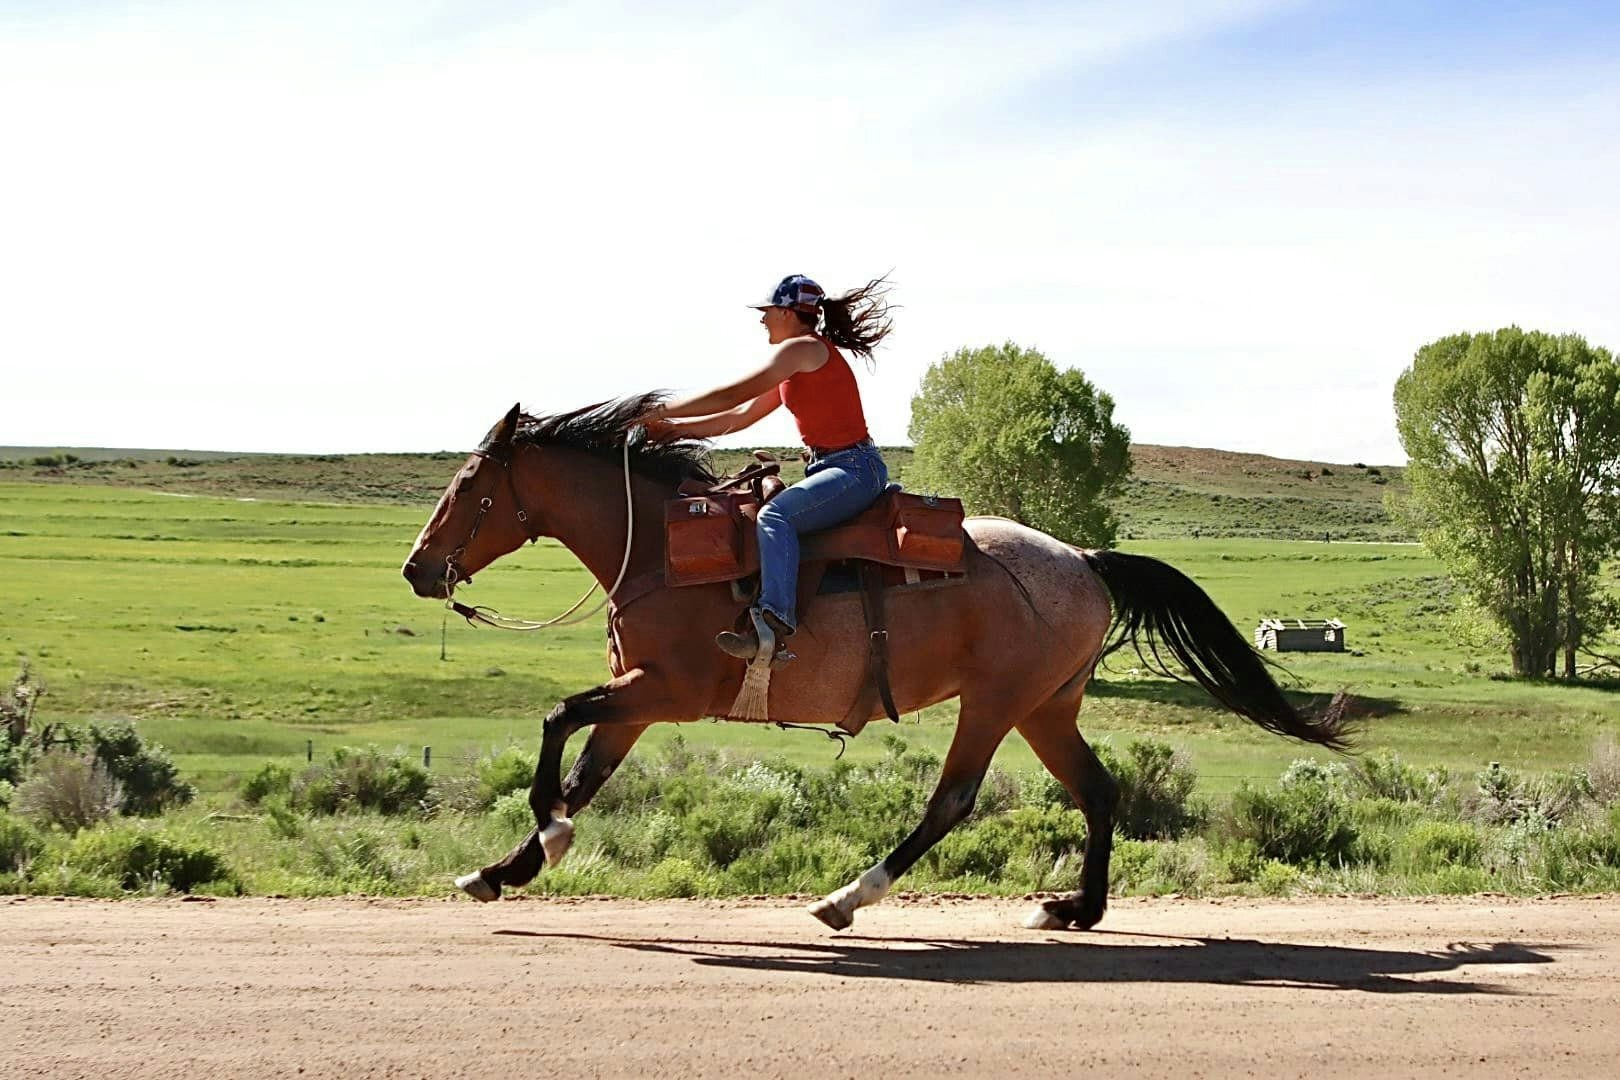 Wyoming volunteers are doing more than 500 miles of the 1,800-mile annual Pony Express Re-Ride this week.